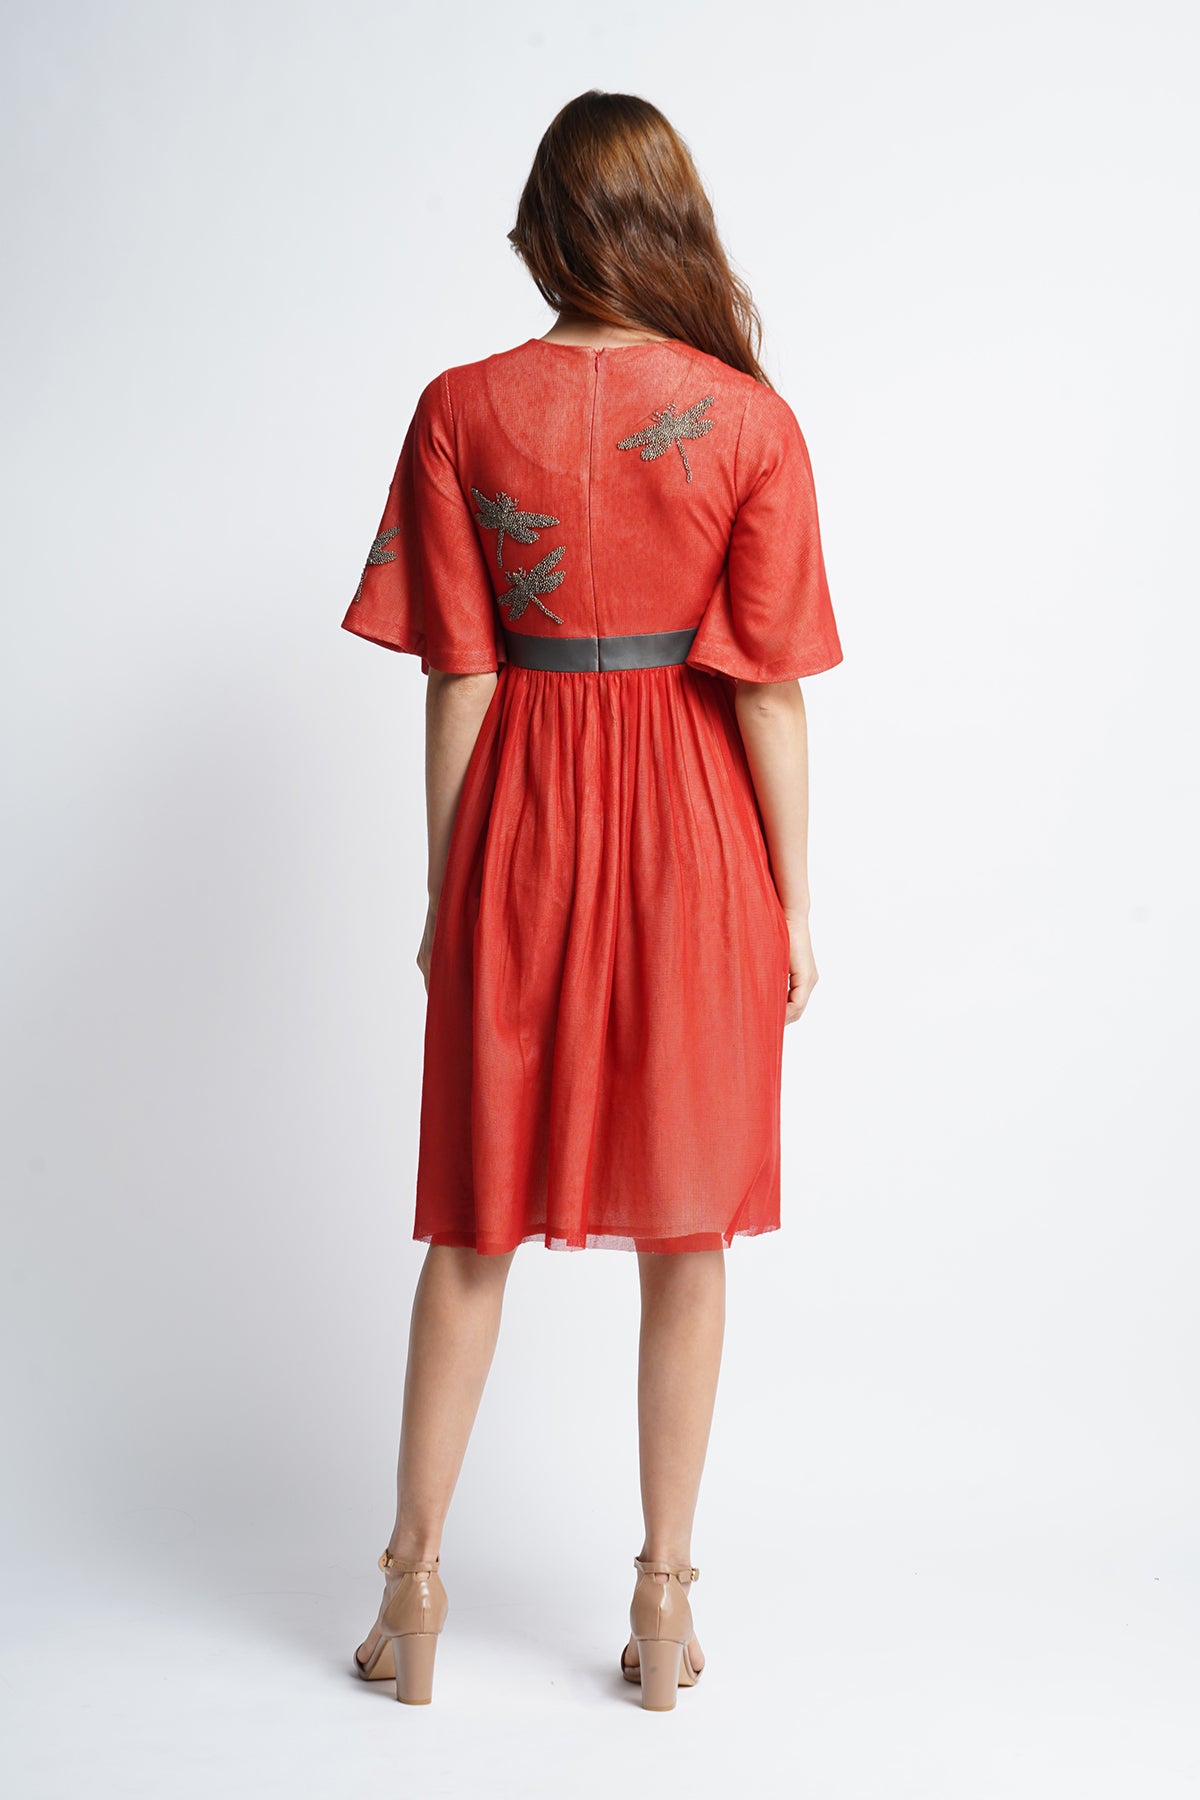 Dotted Dragonfly Midi Dress with Leather Belt